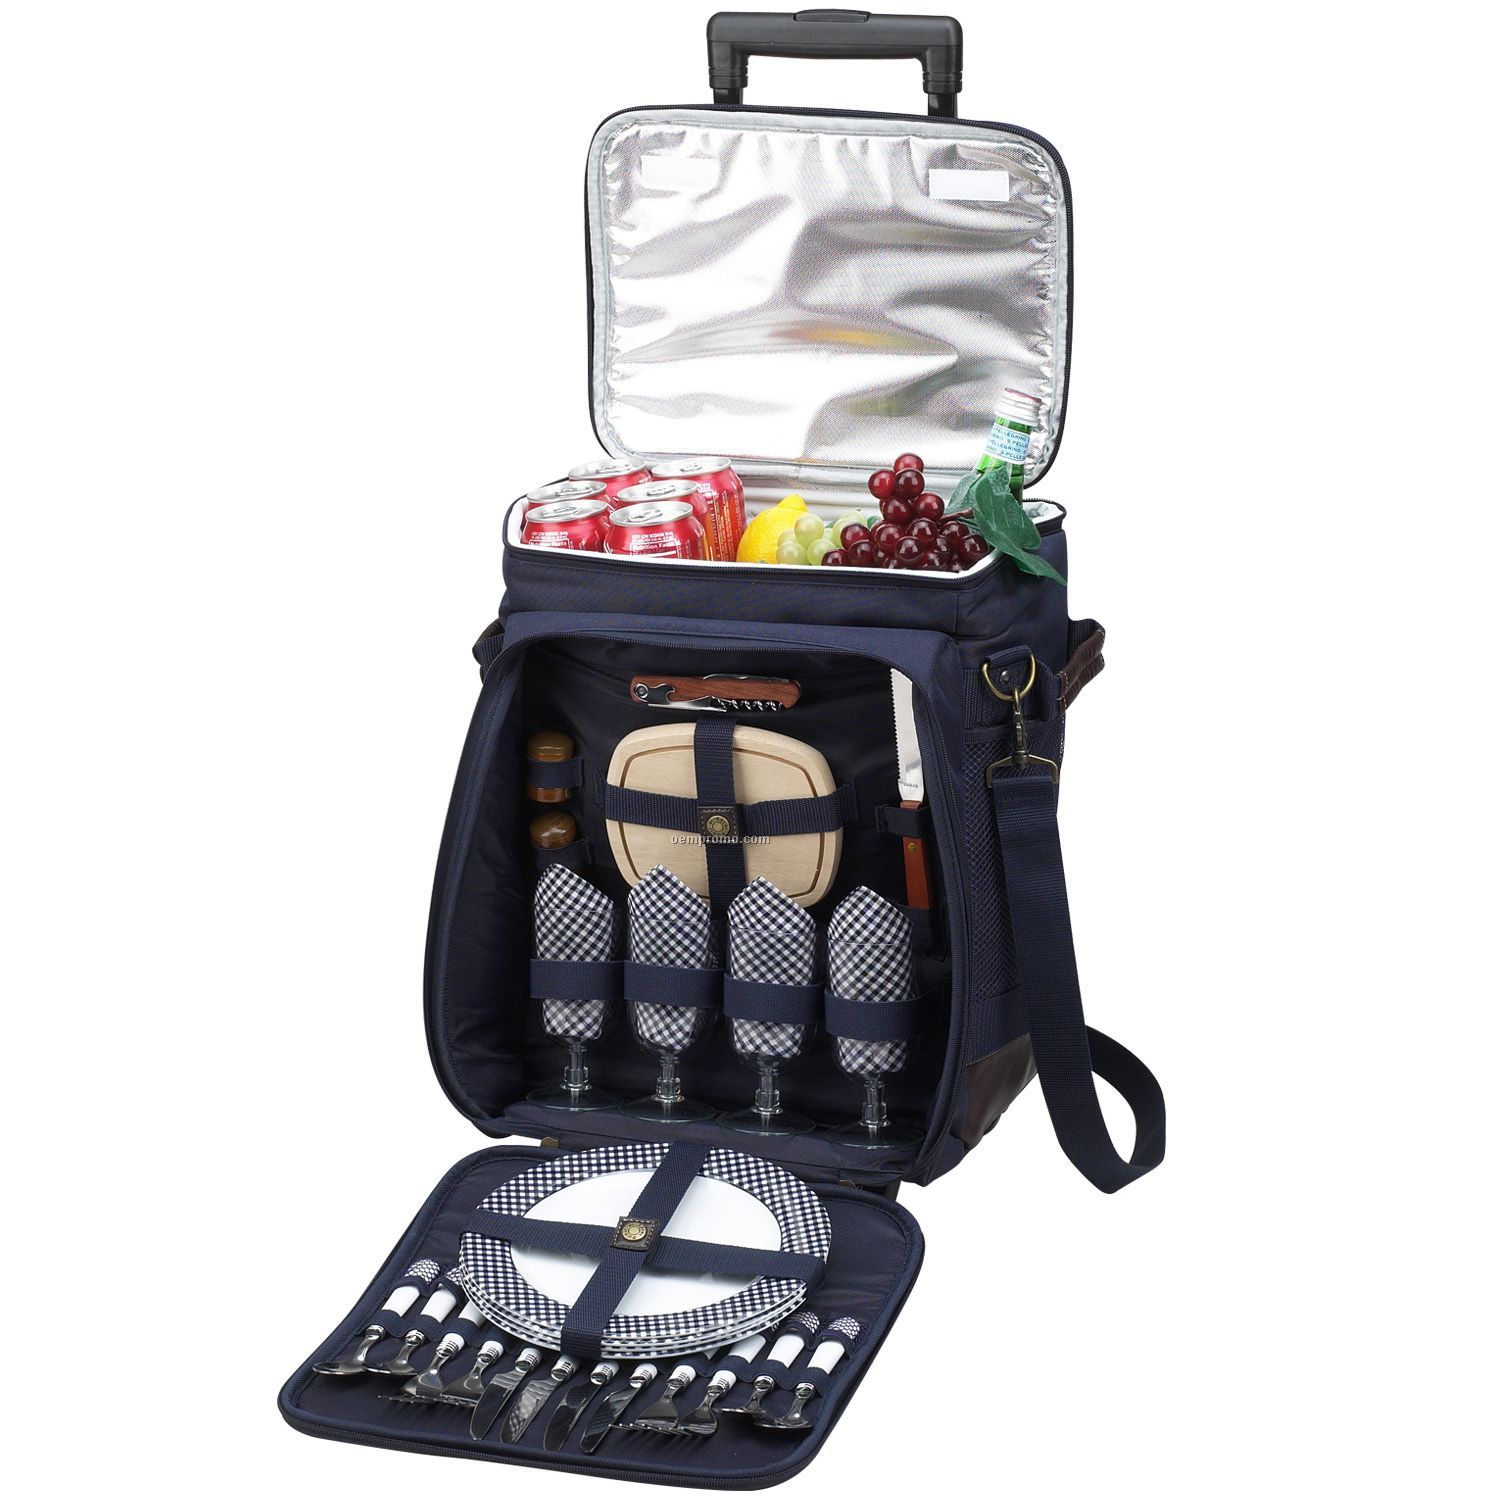 Collapsible Picnic Cooler On Wheels For Four